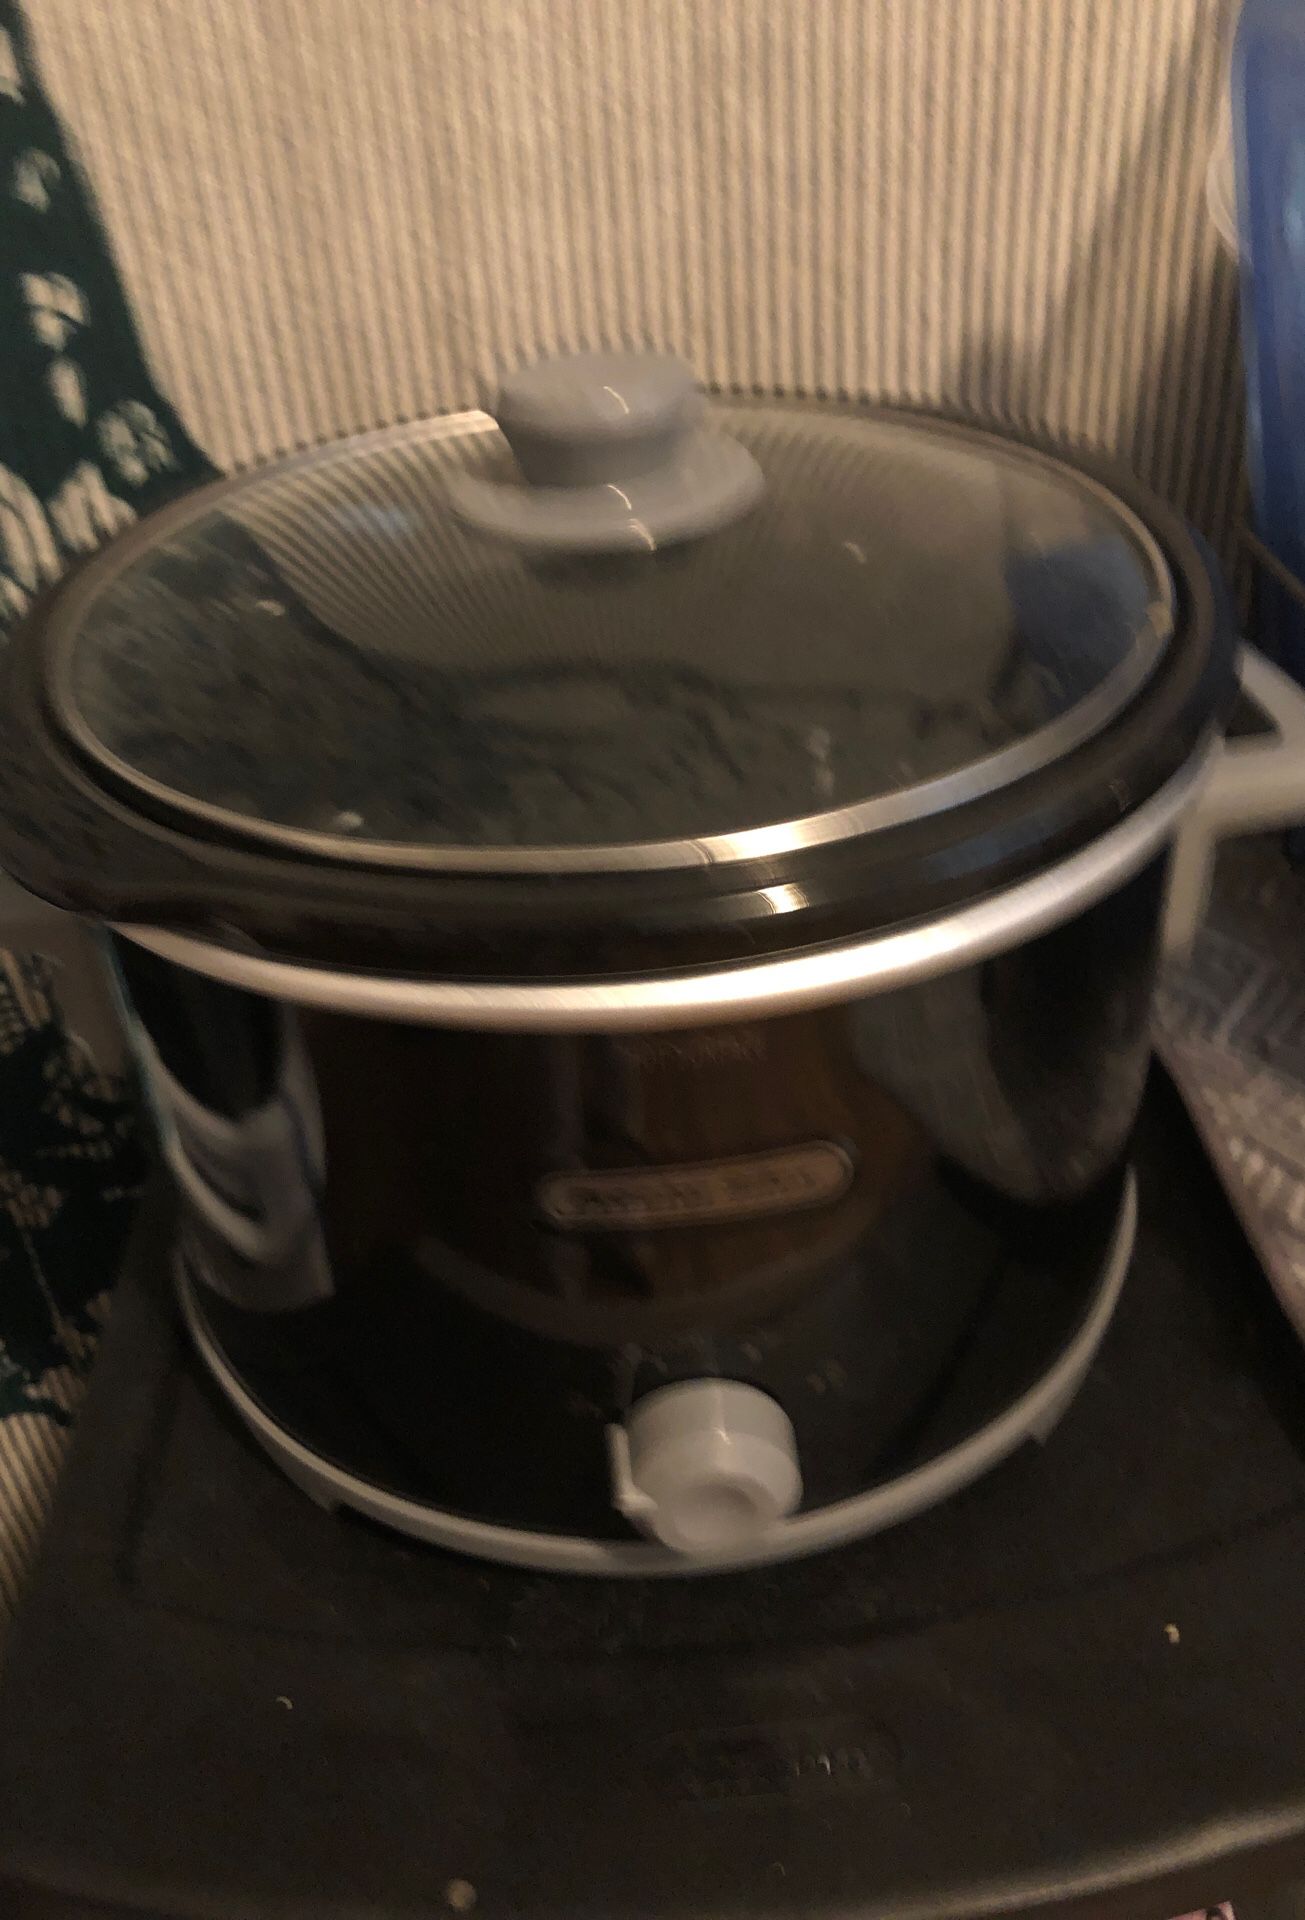 Slow cooker for sale